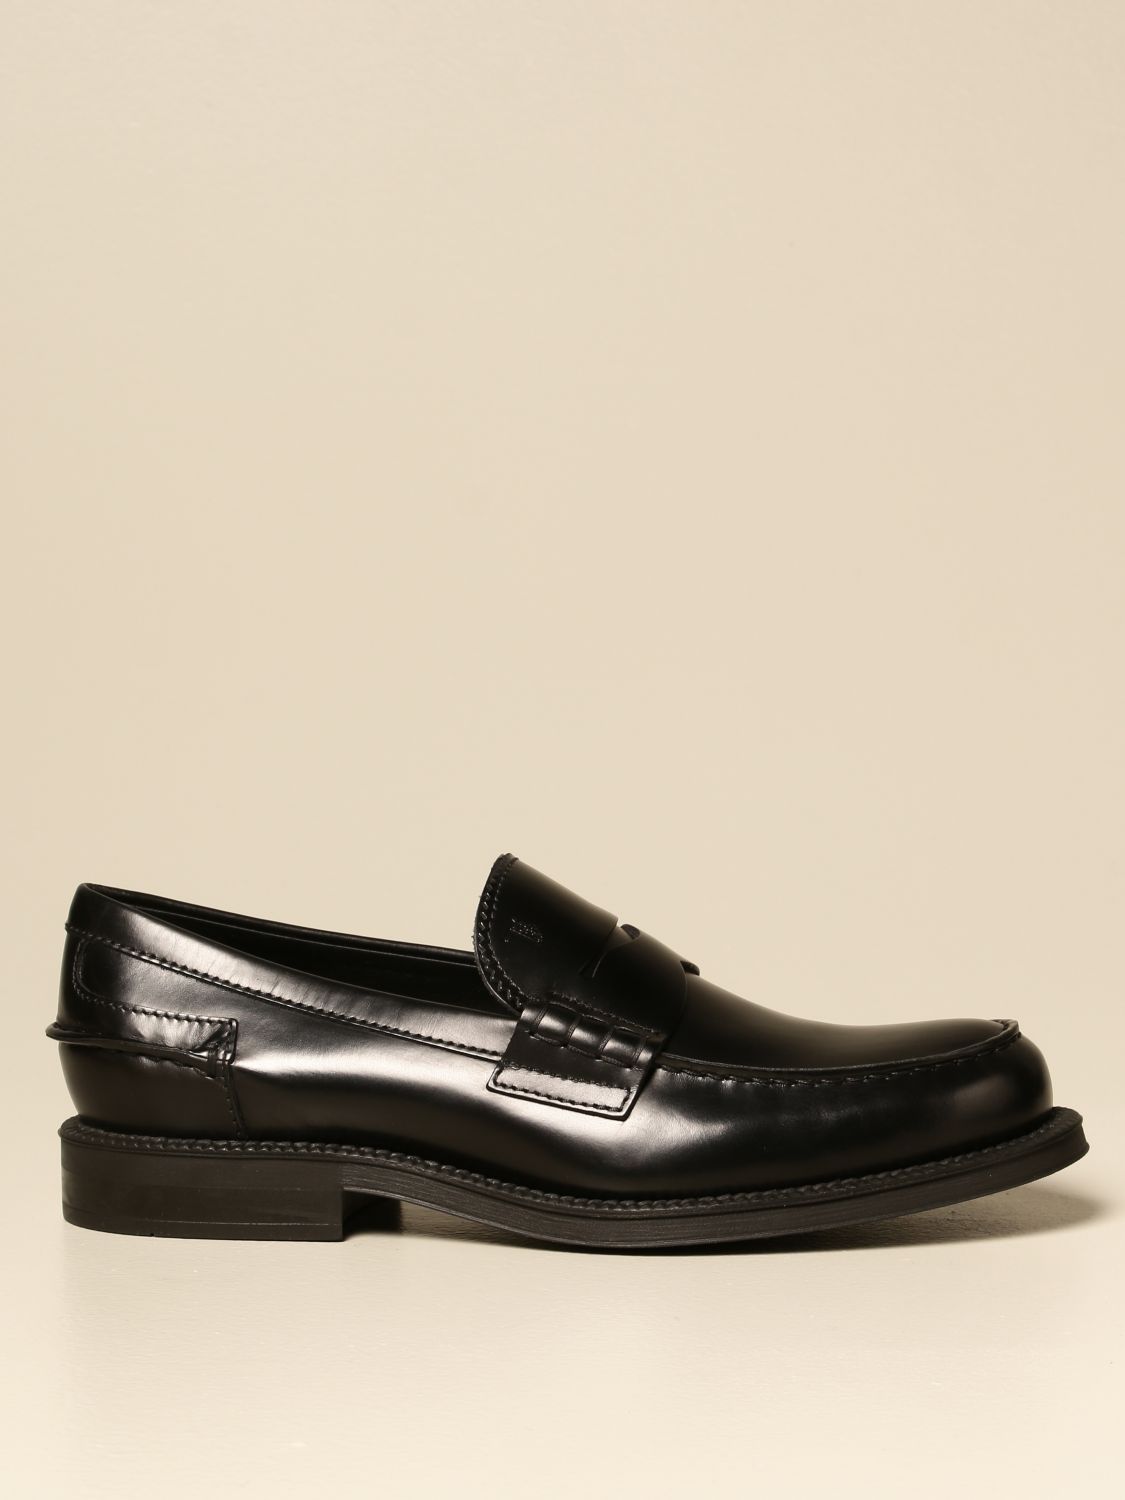 tods shoes black